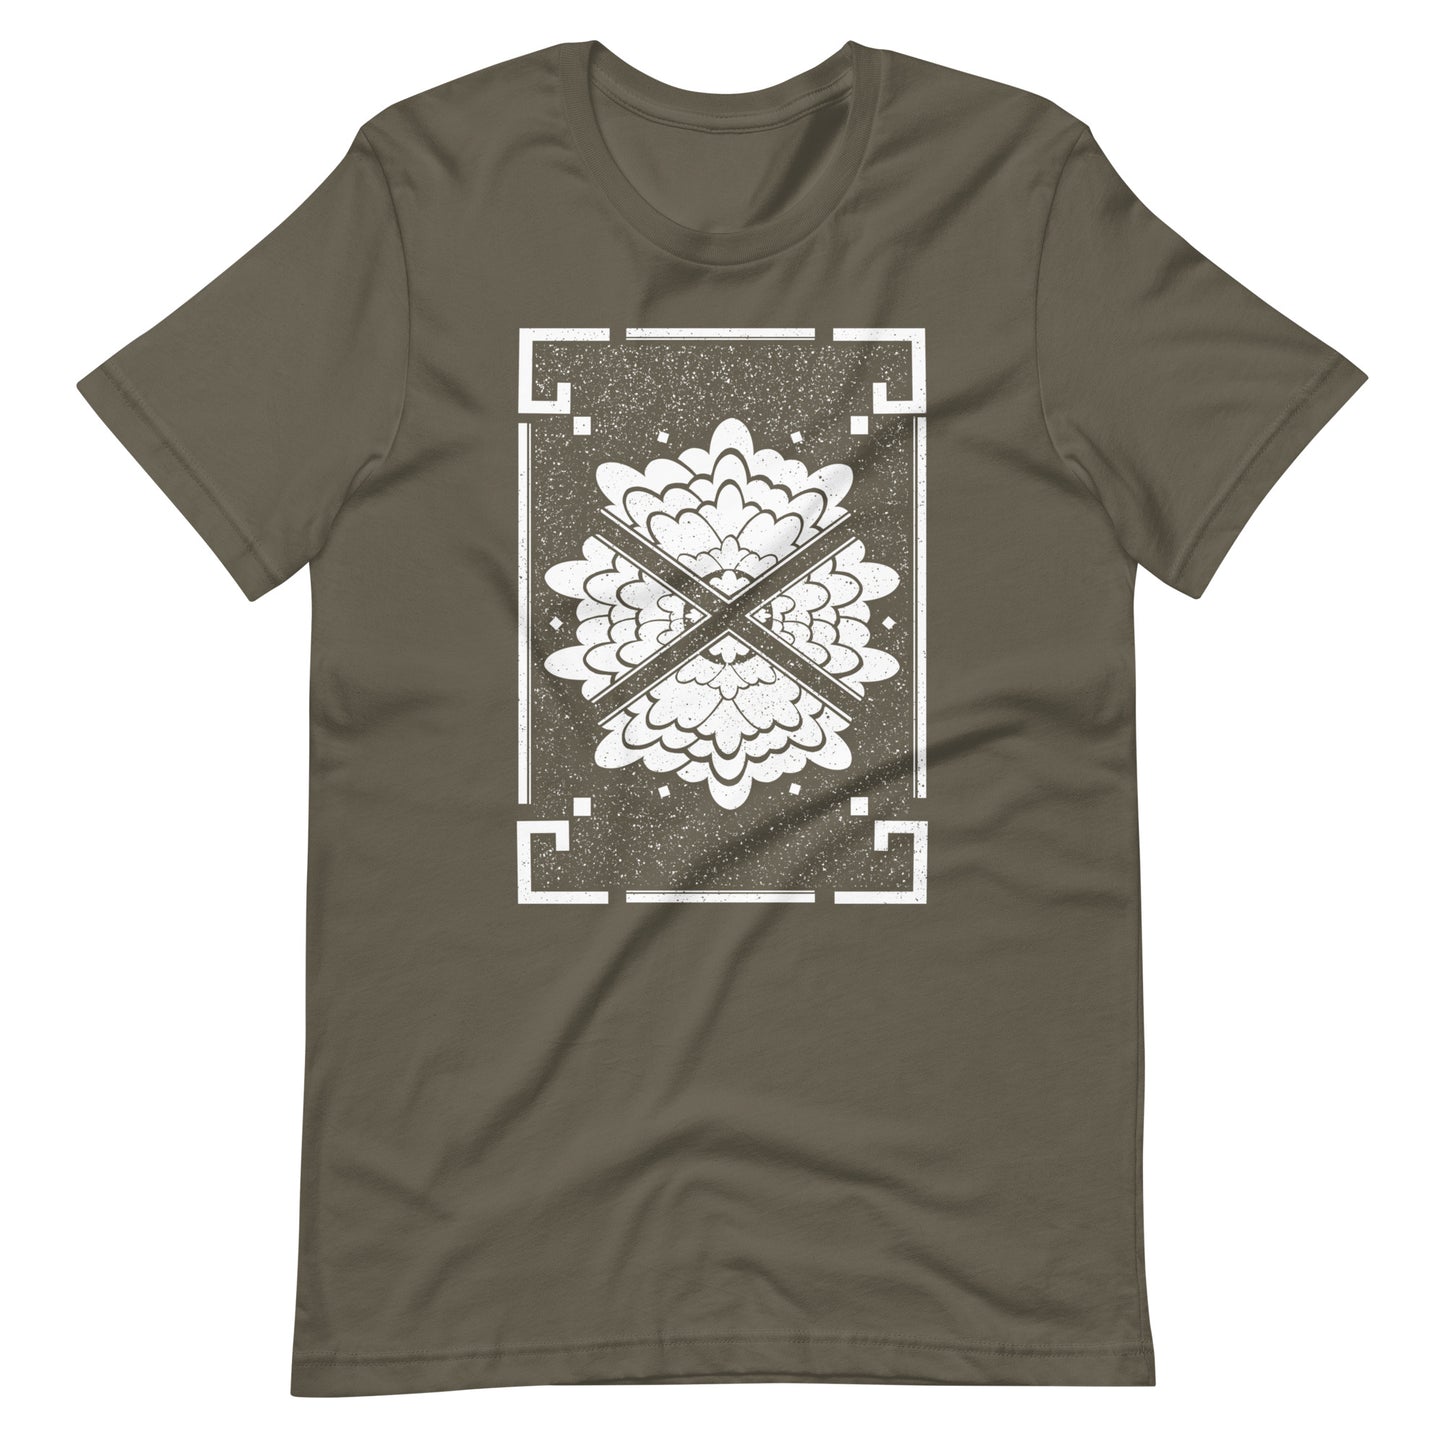  Flower - Men's t-shirt - Army Front